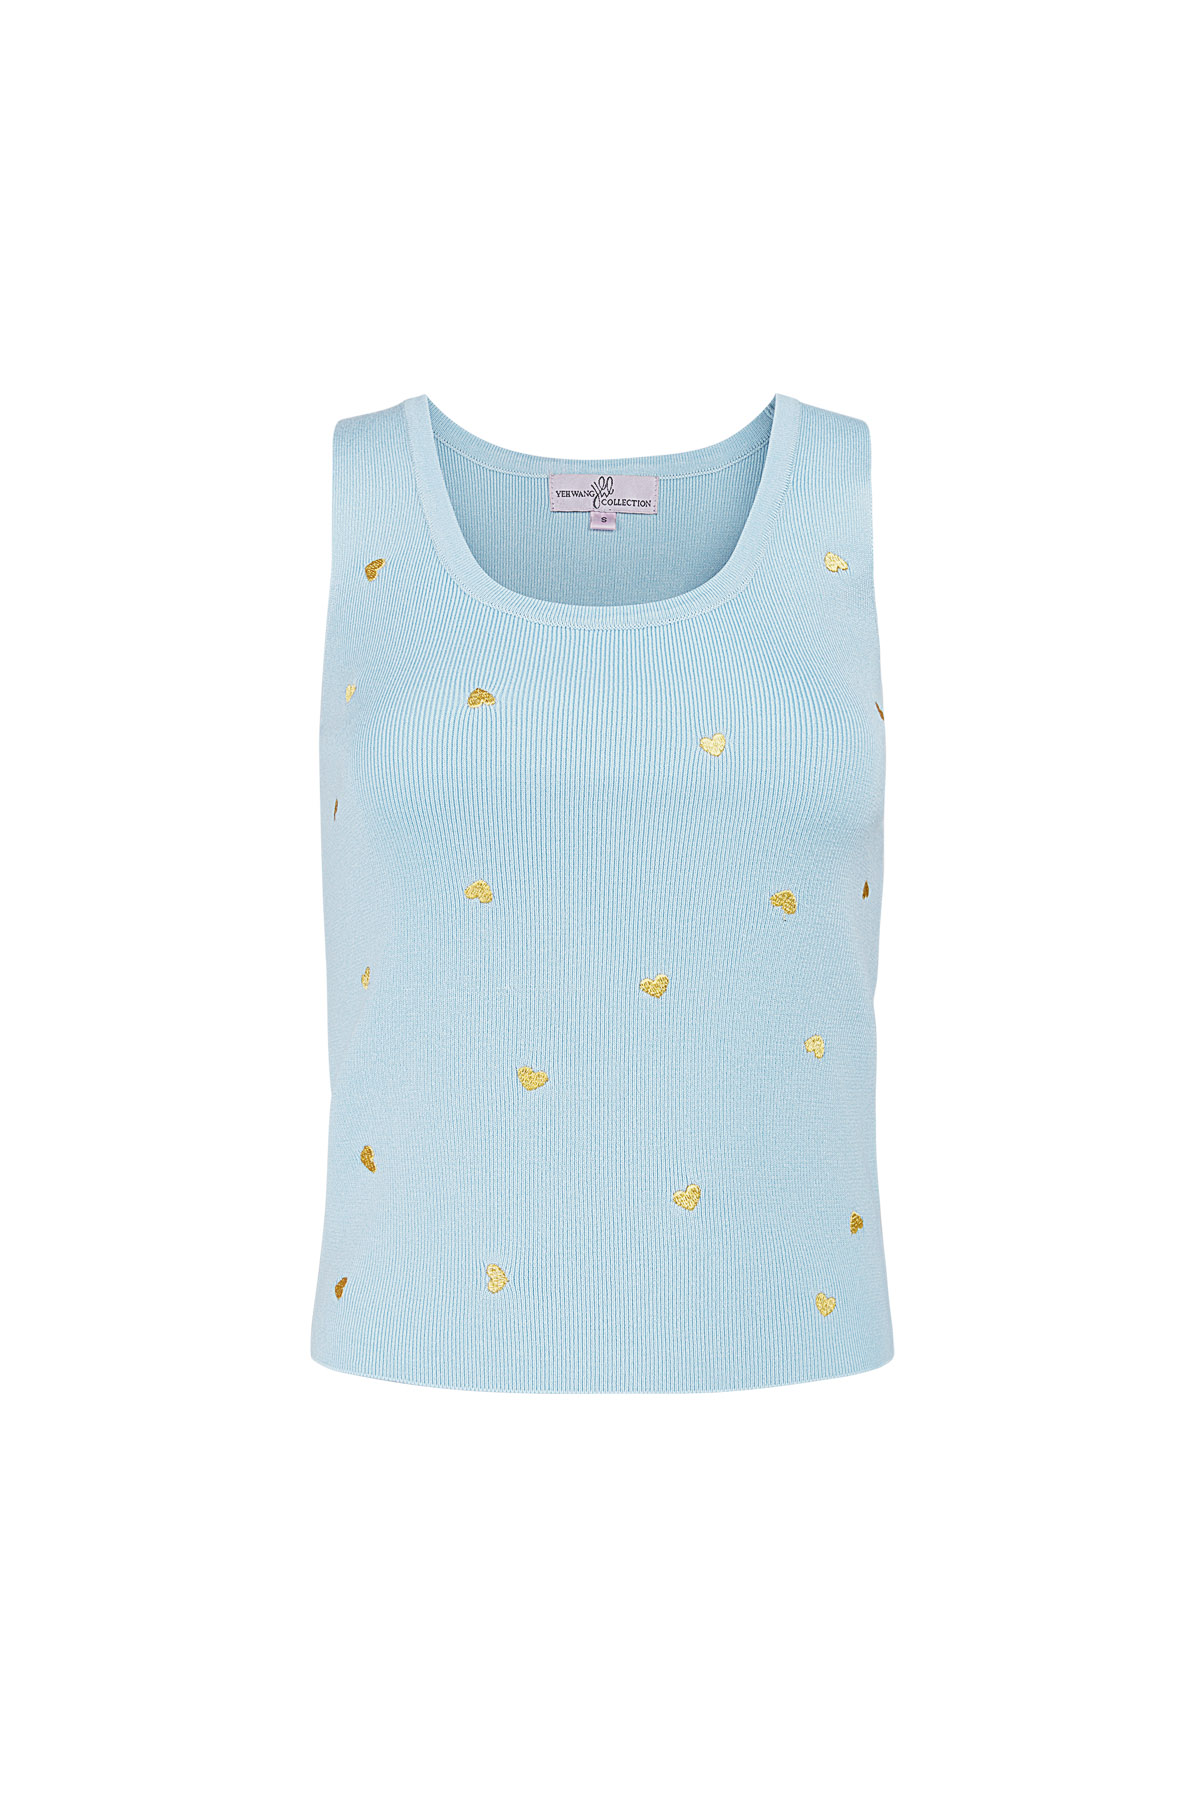 Sleeveless top with gold heart details small – blue